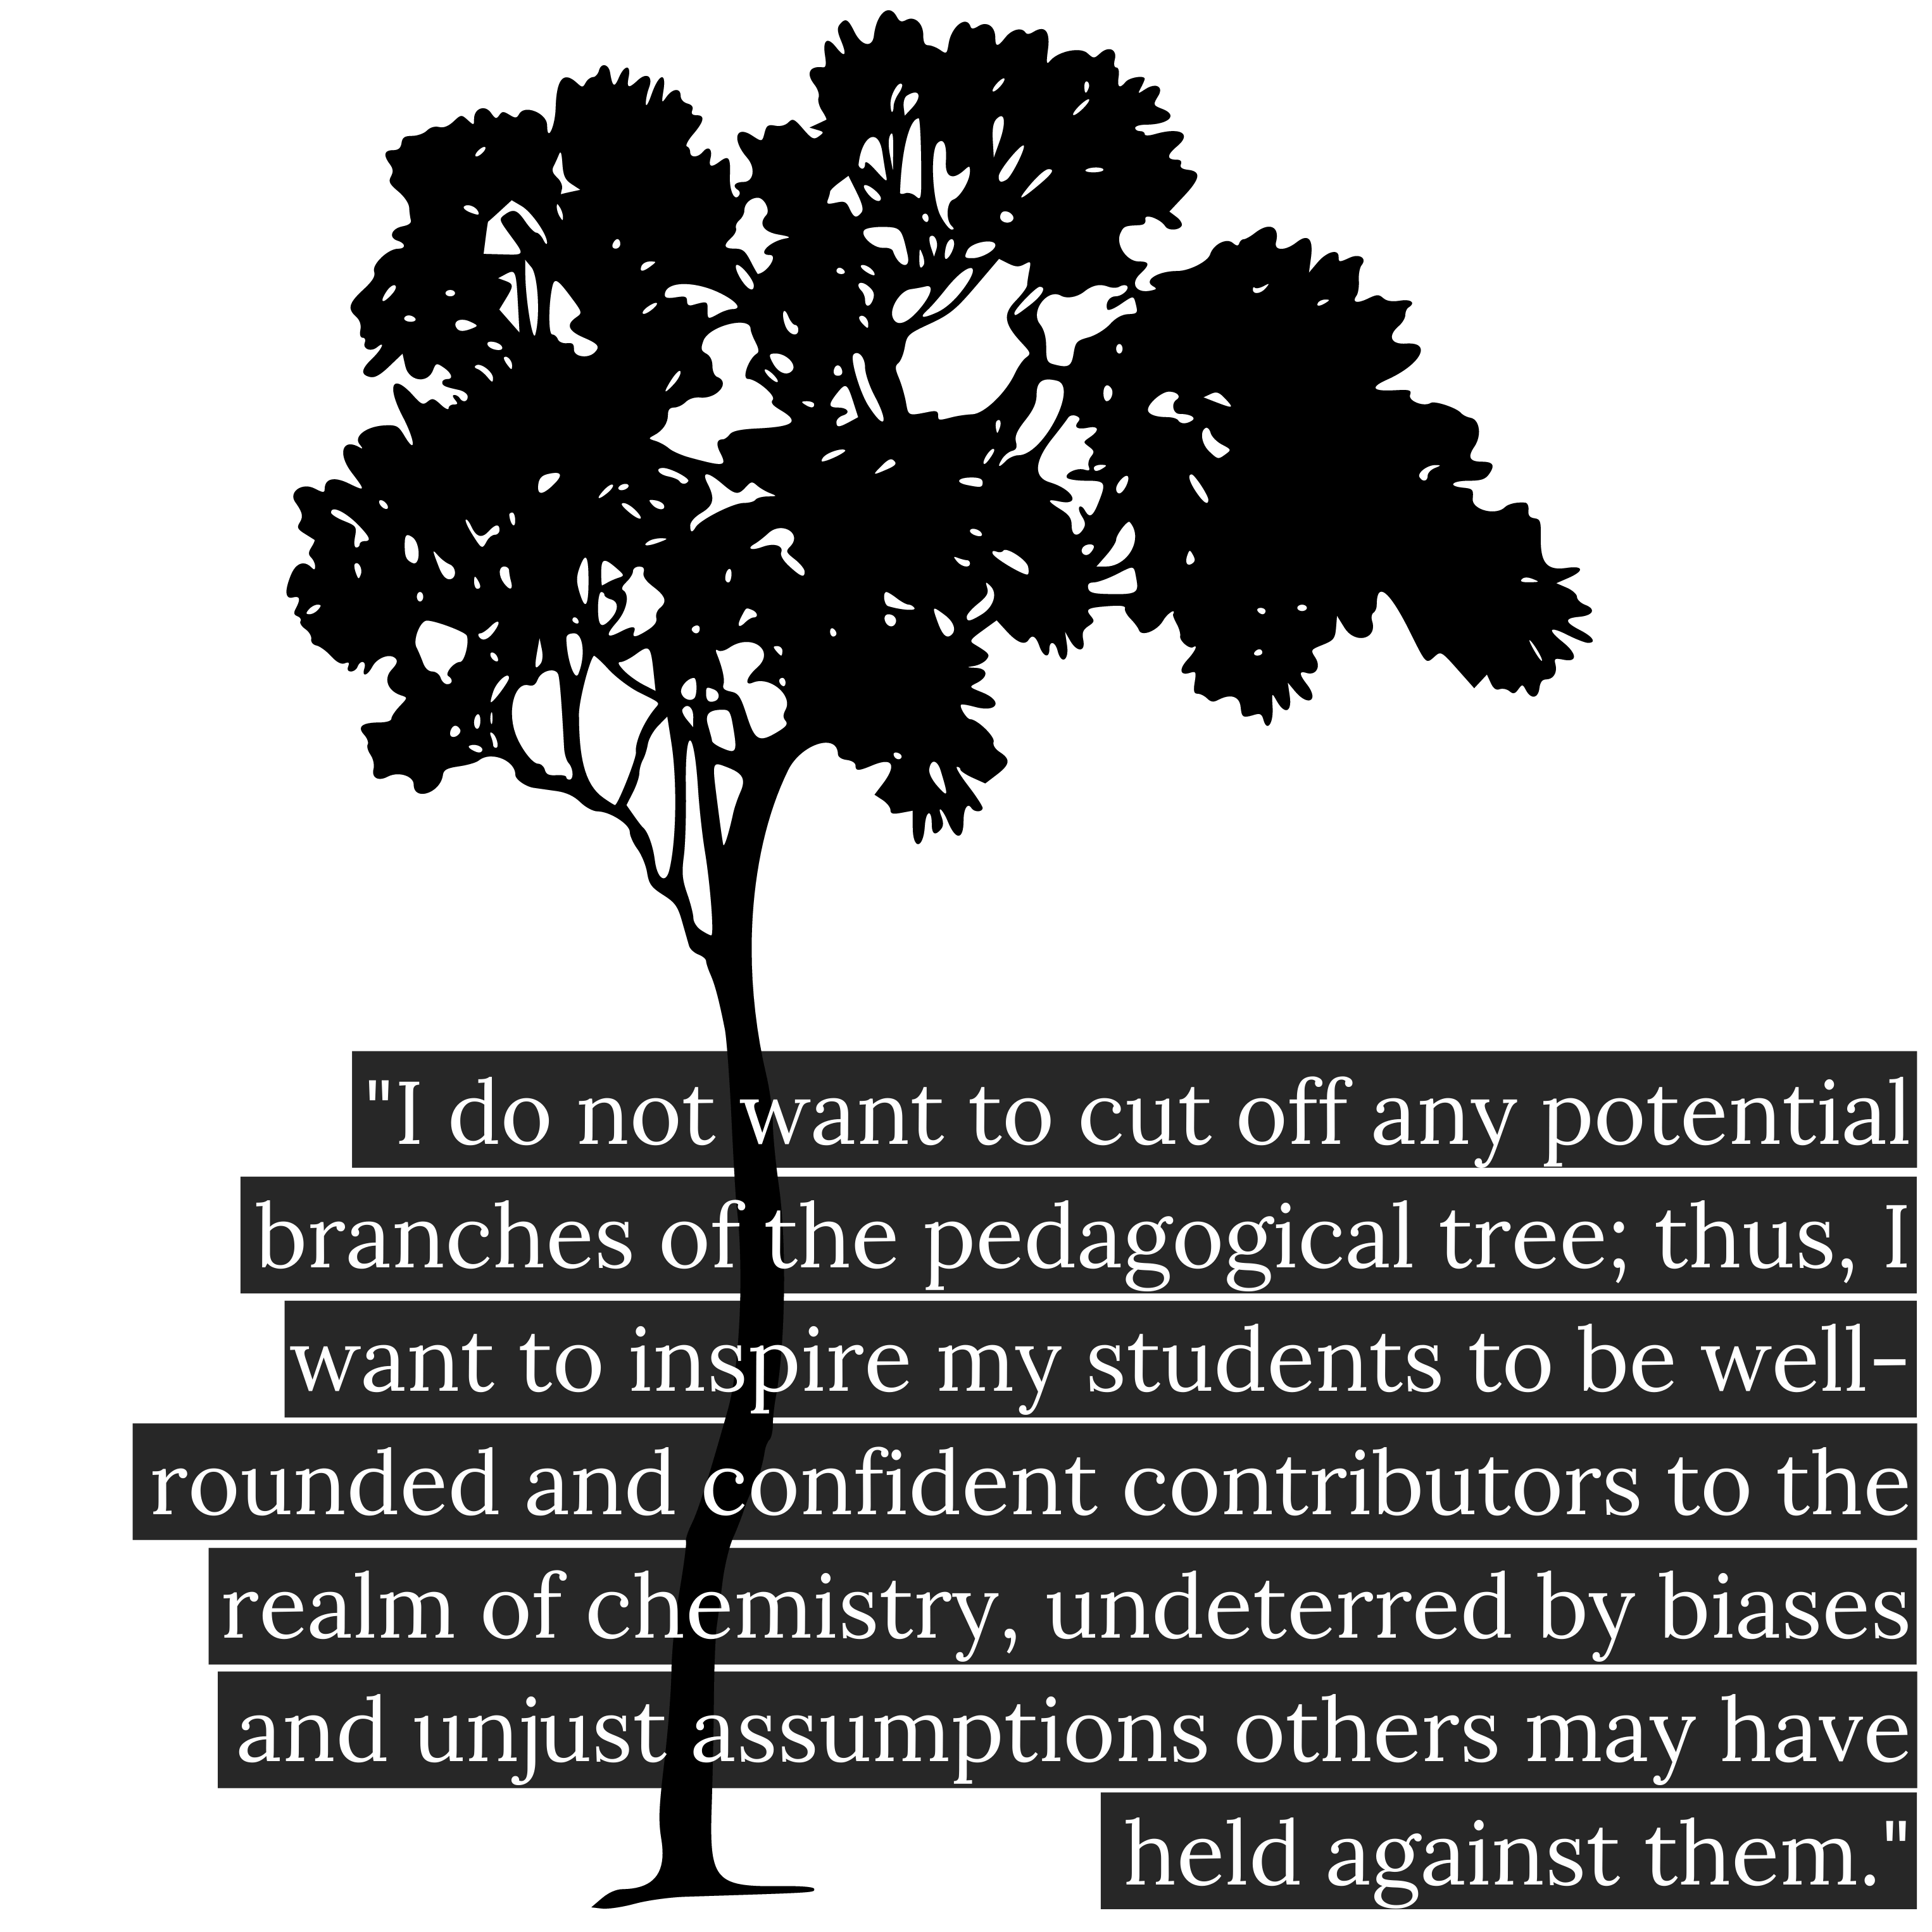 An image of a tall black savannah tree against a white background. Superimposed on the tree in black and white it reads, “I do not want to cut off any potential branches of the pedagogical tree; thus, I want to inspire my students to be well-rounded and confident contributors to the realm of chemistry, undeterred by biases and unjust assumptions others may have held against them.”